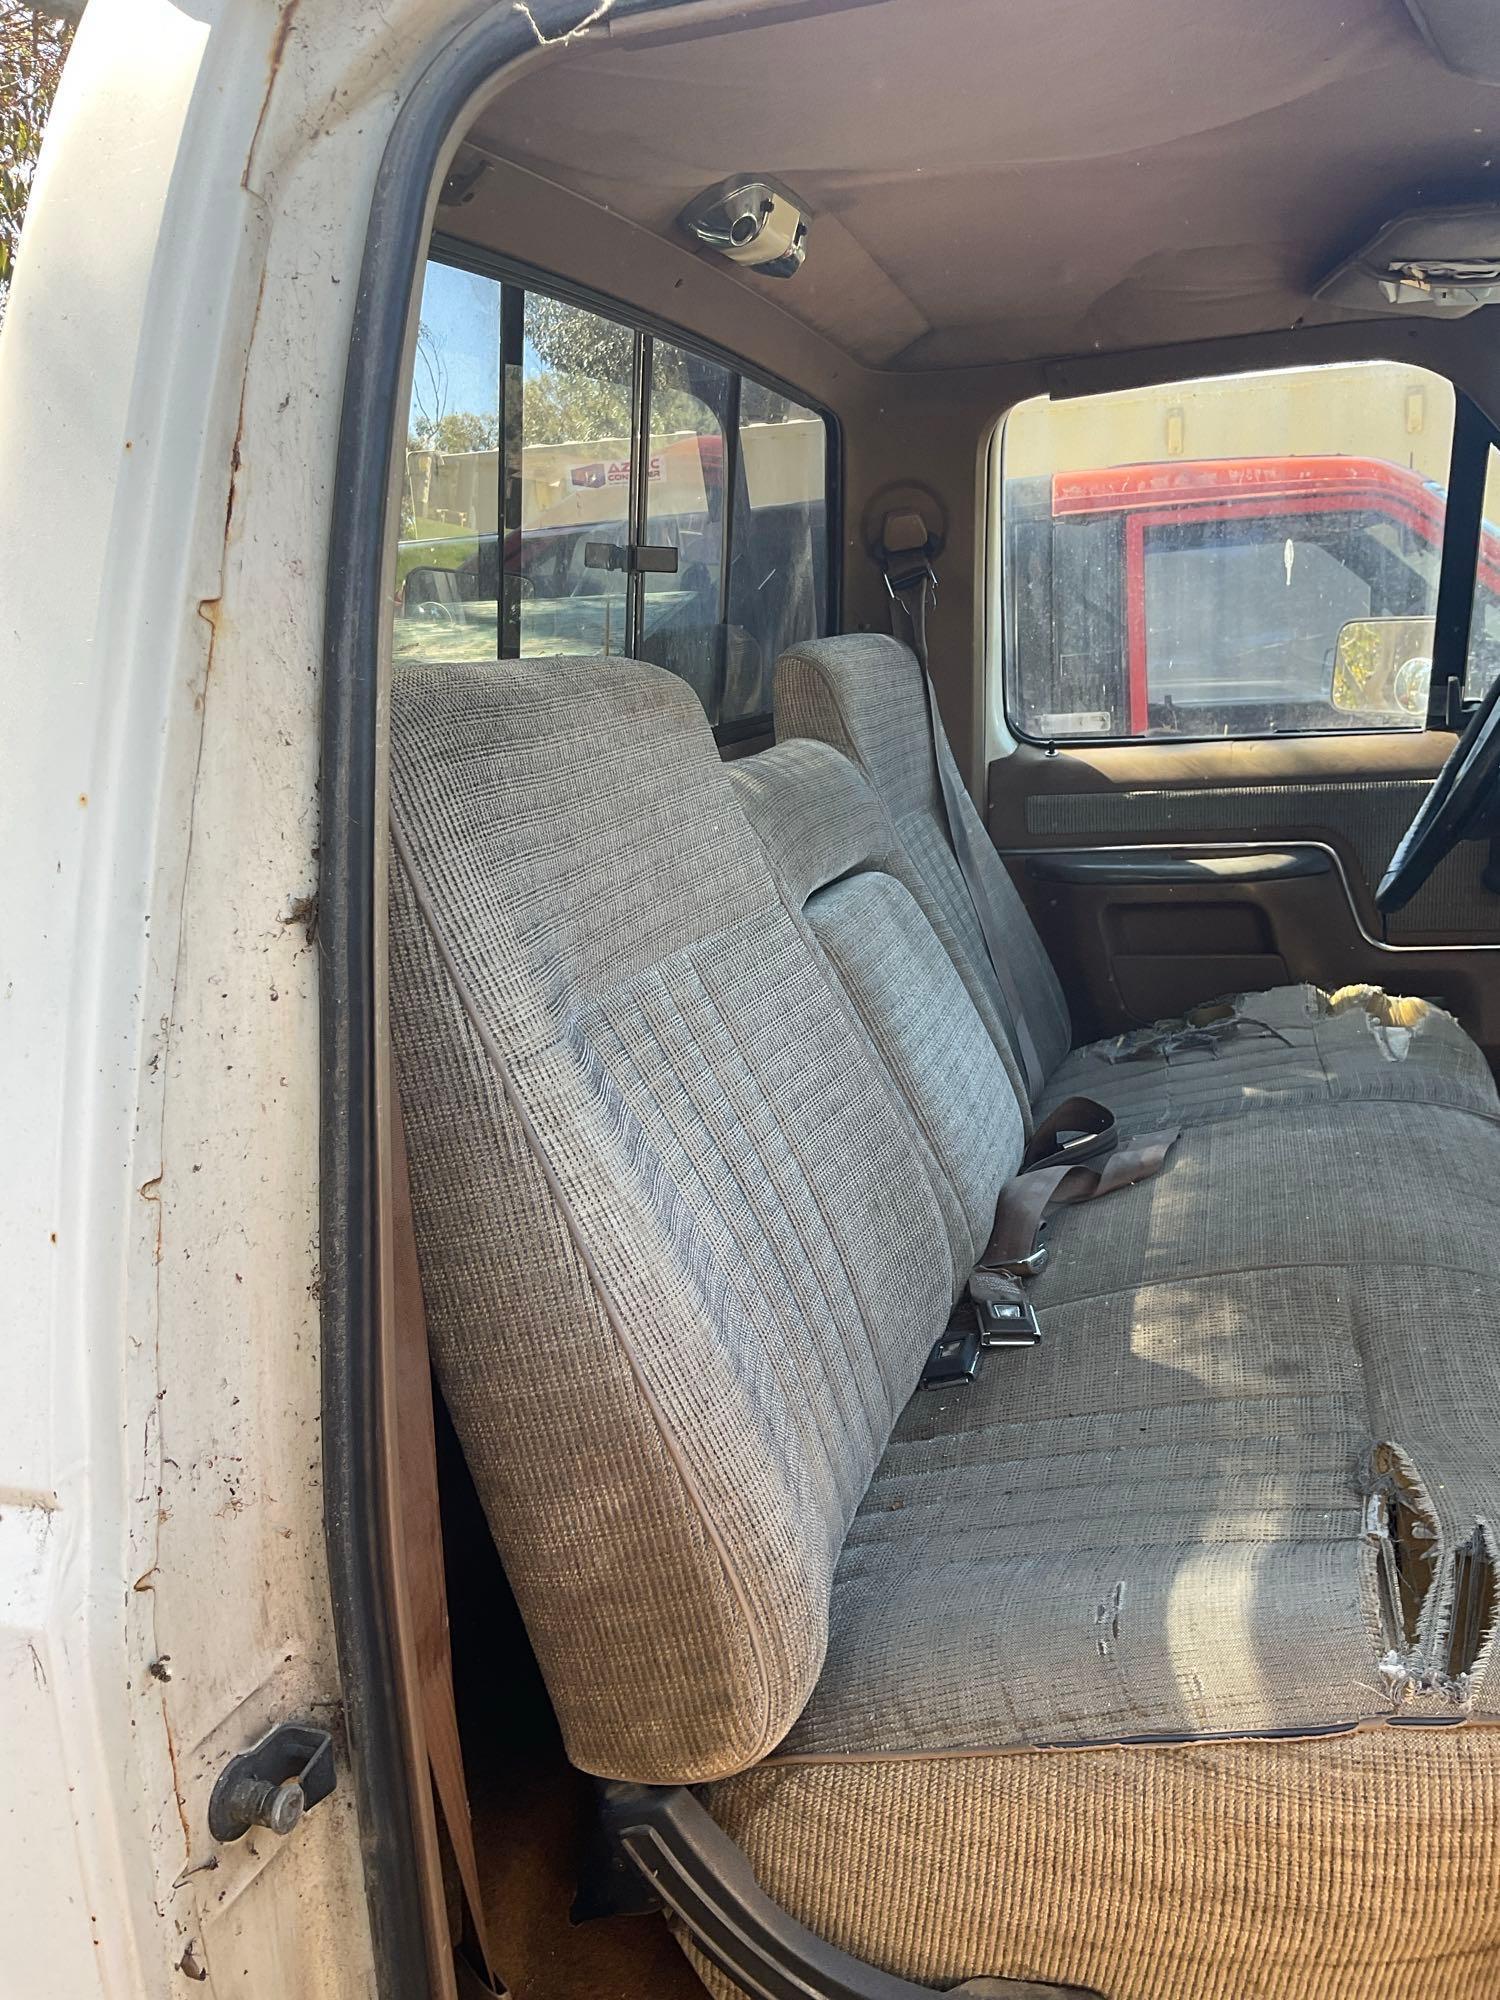 1989 Ford F250, Needs Battery, Motor ( runs ) BUT STALLS OUT, Actual Mileage is 181063